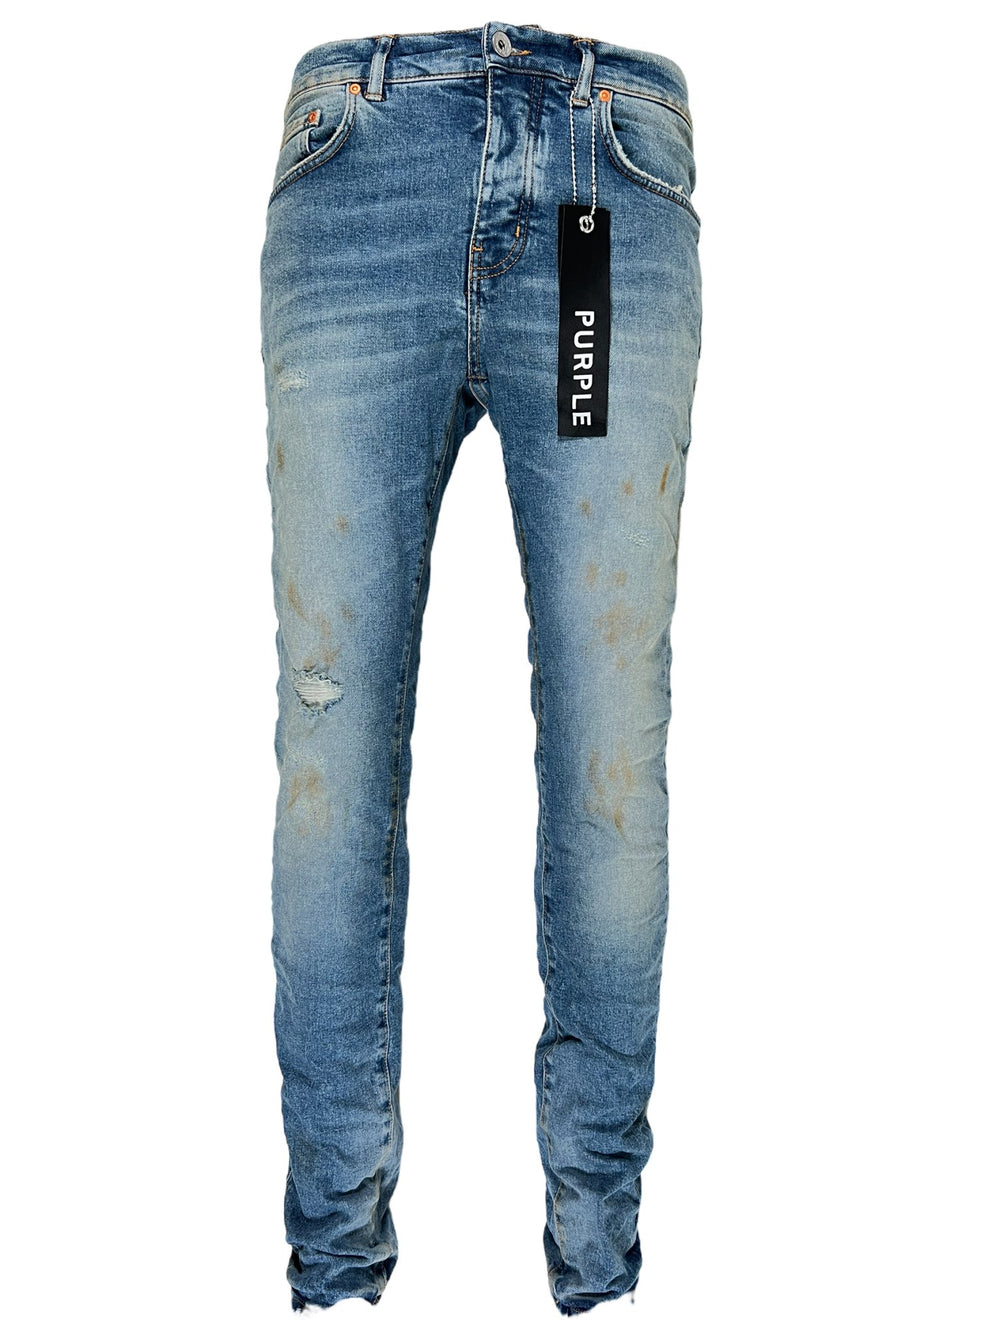 A pair of PURPLE BRAND blue jeans with a tag on them.